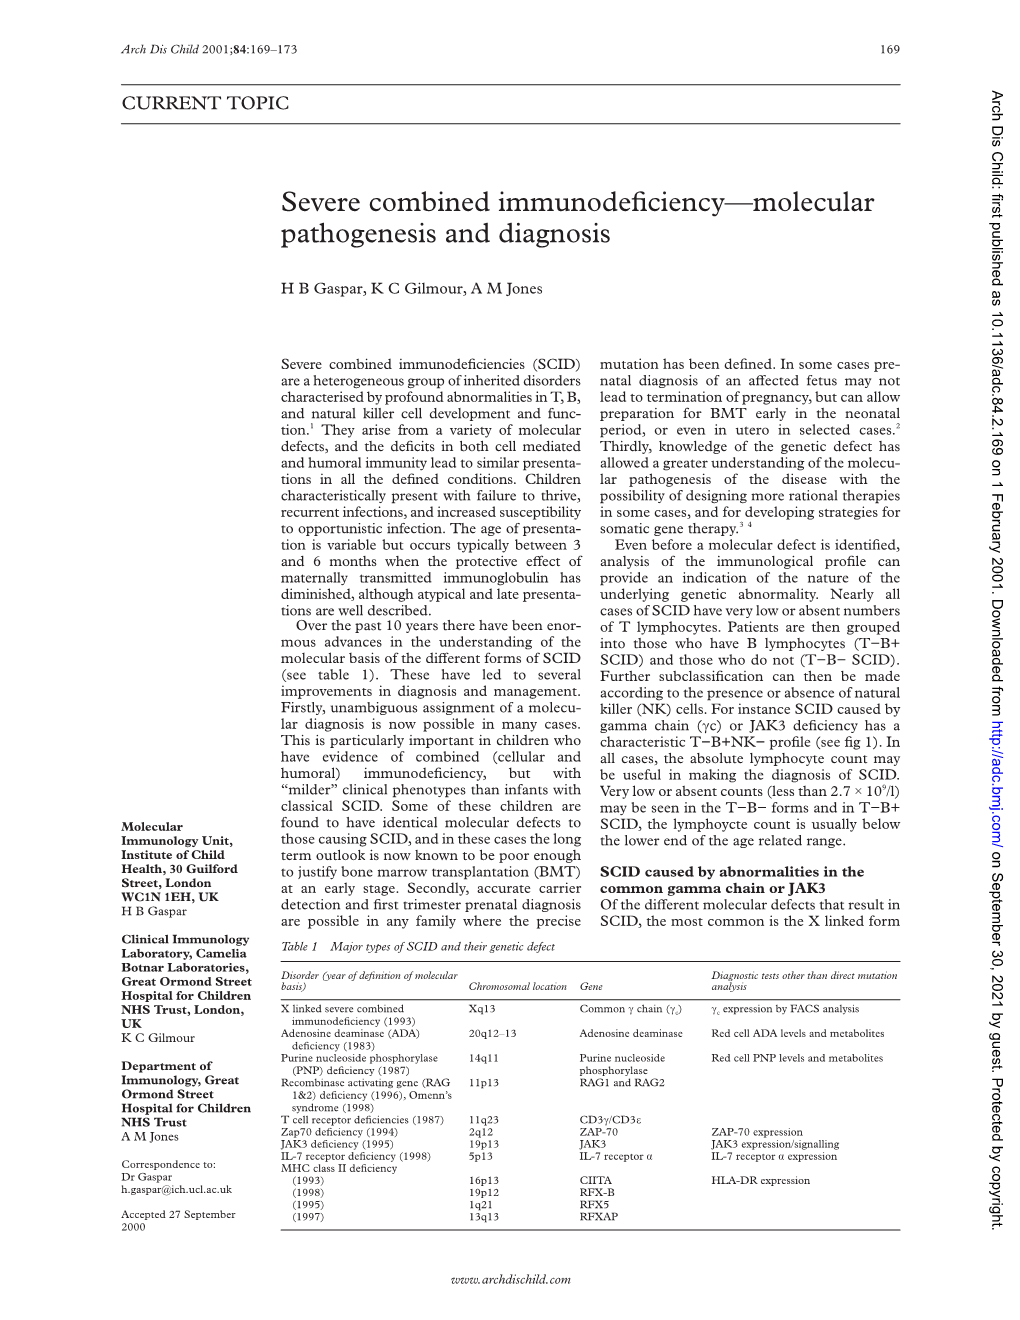 Severe Combined Immunodeficiency—Molecular Pathogenesis and Diagnosis